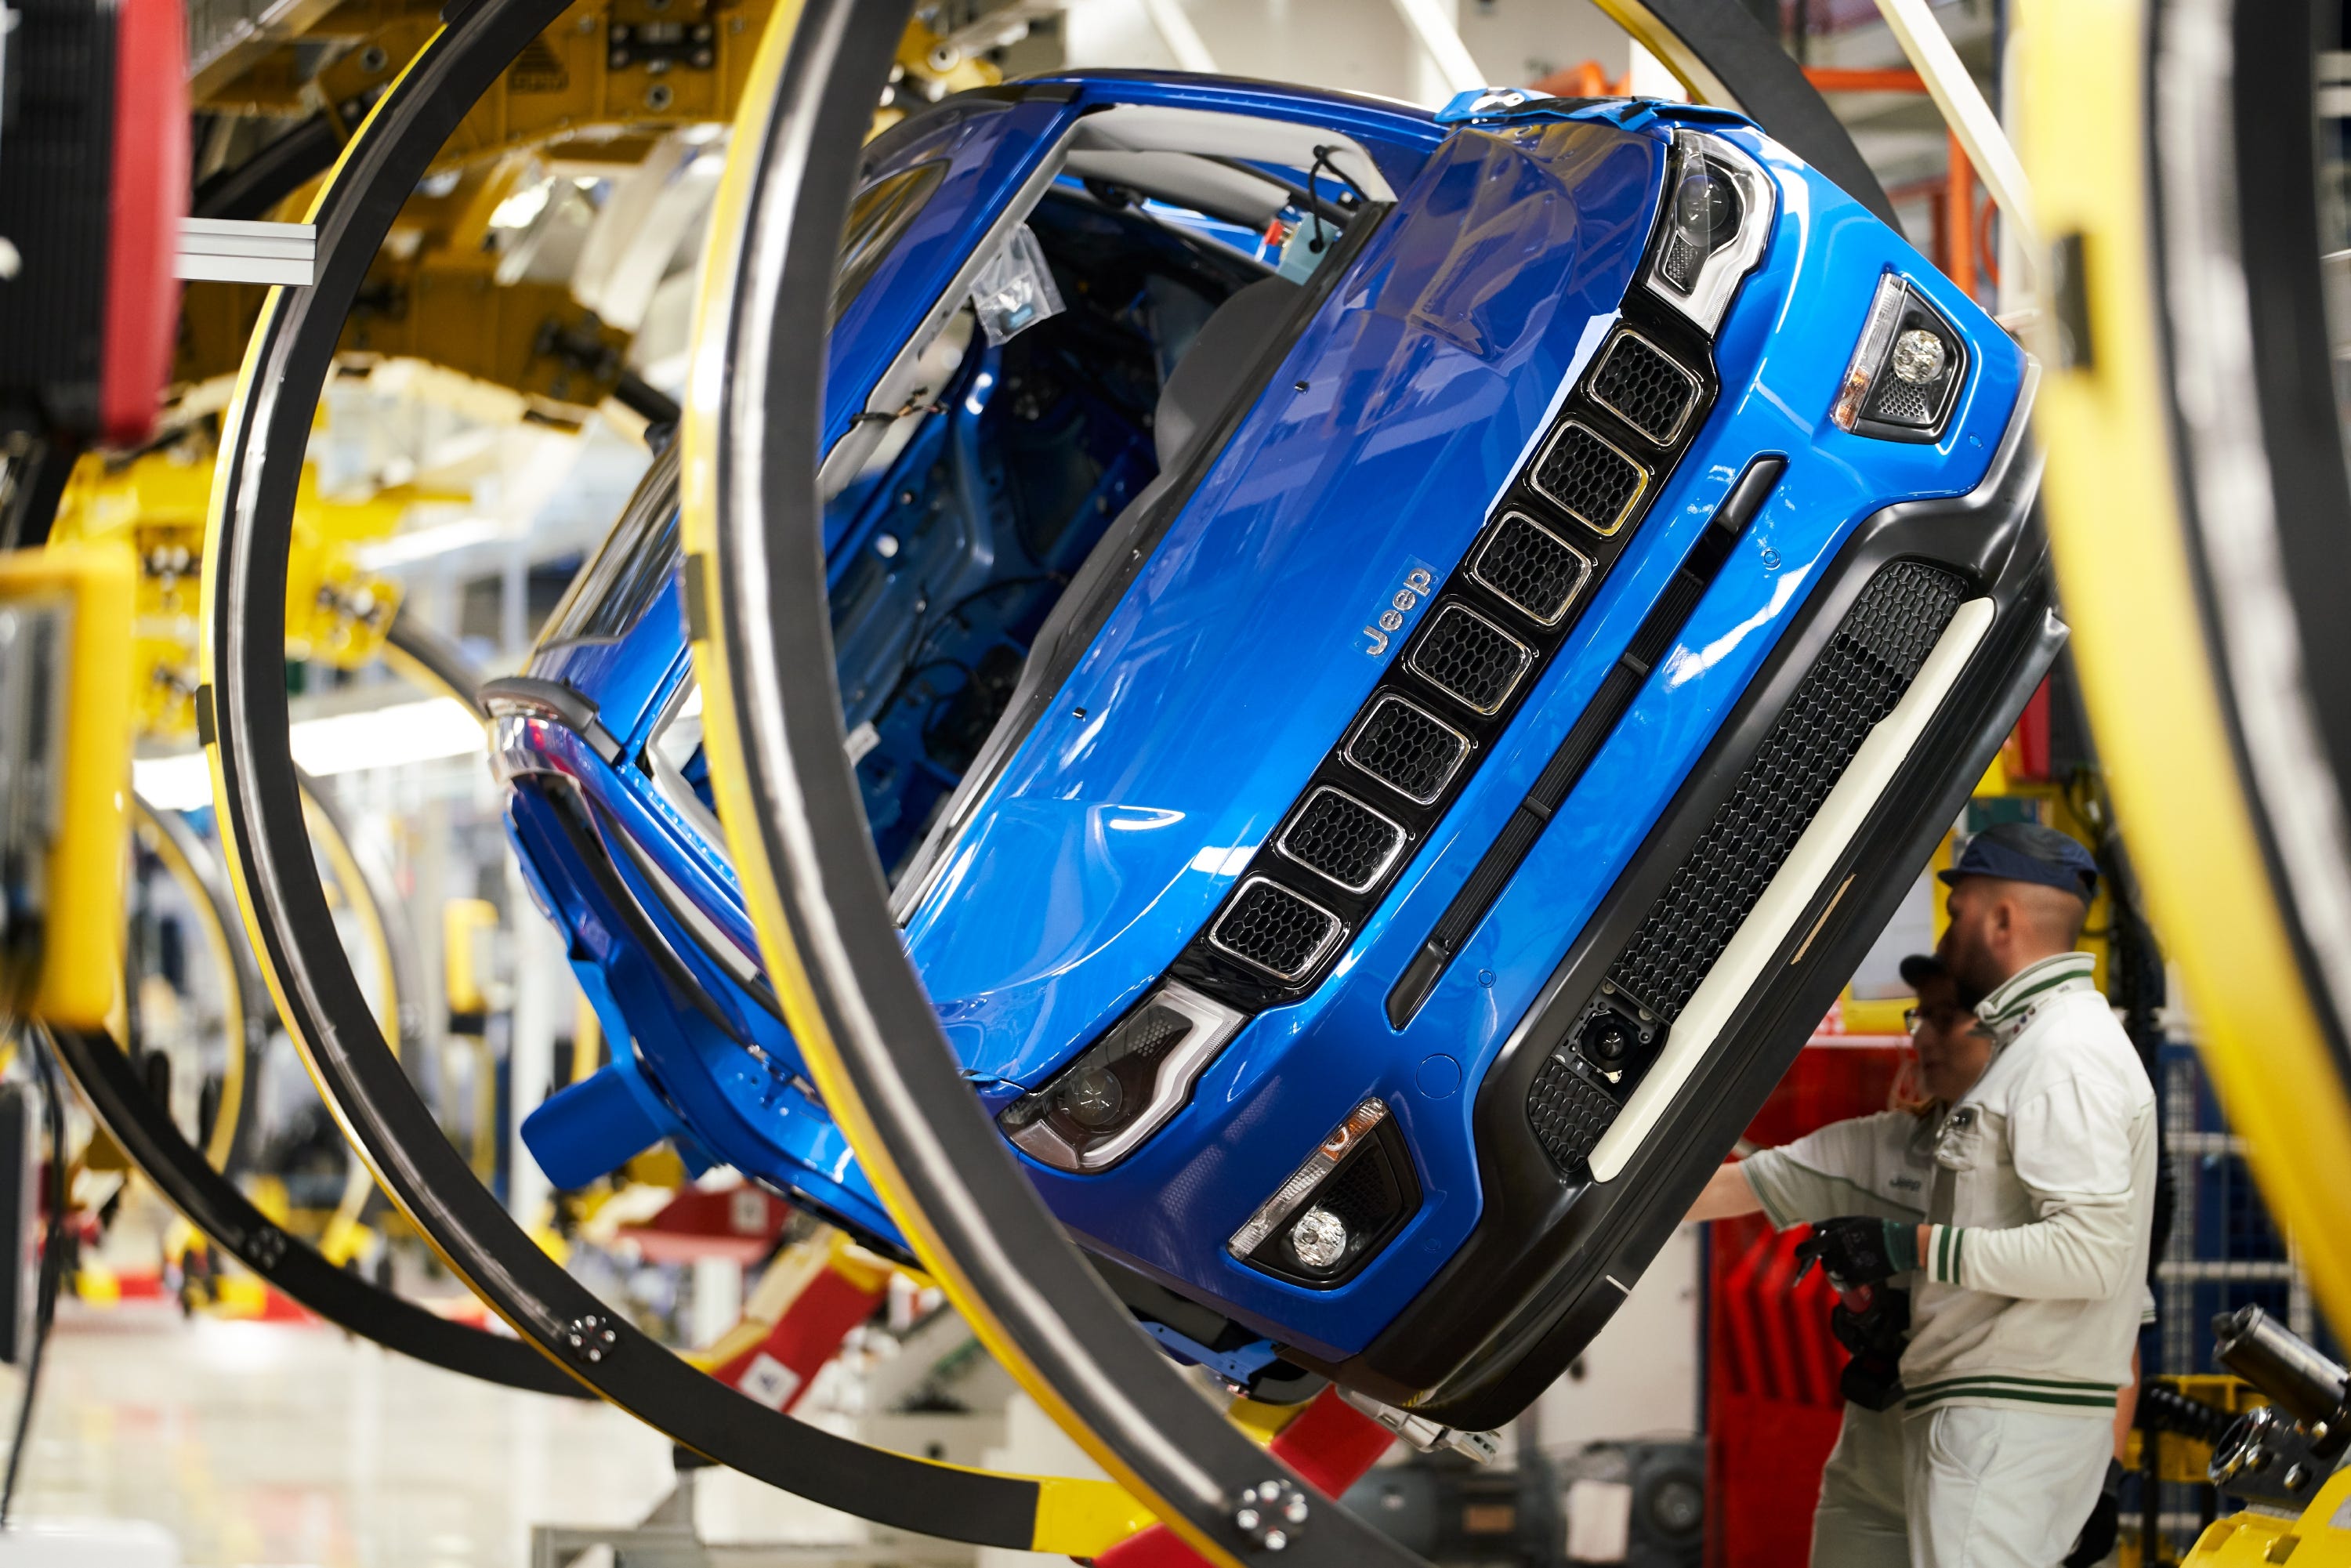 The new production line for Jeep Compass - also including the Plug-in Hybrid version - started October 17th, 2019 at the Melfi plant in Basilicata.